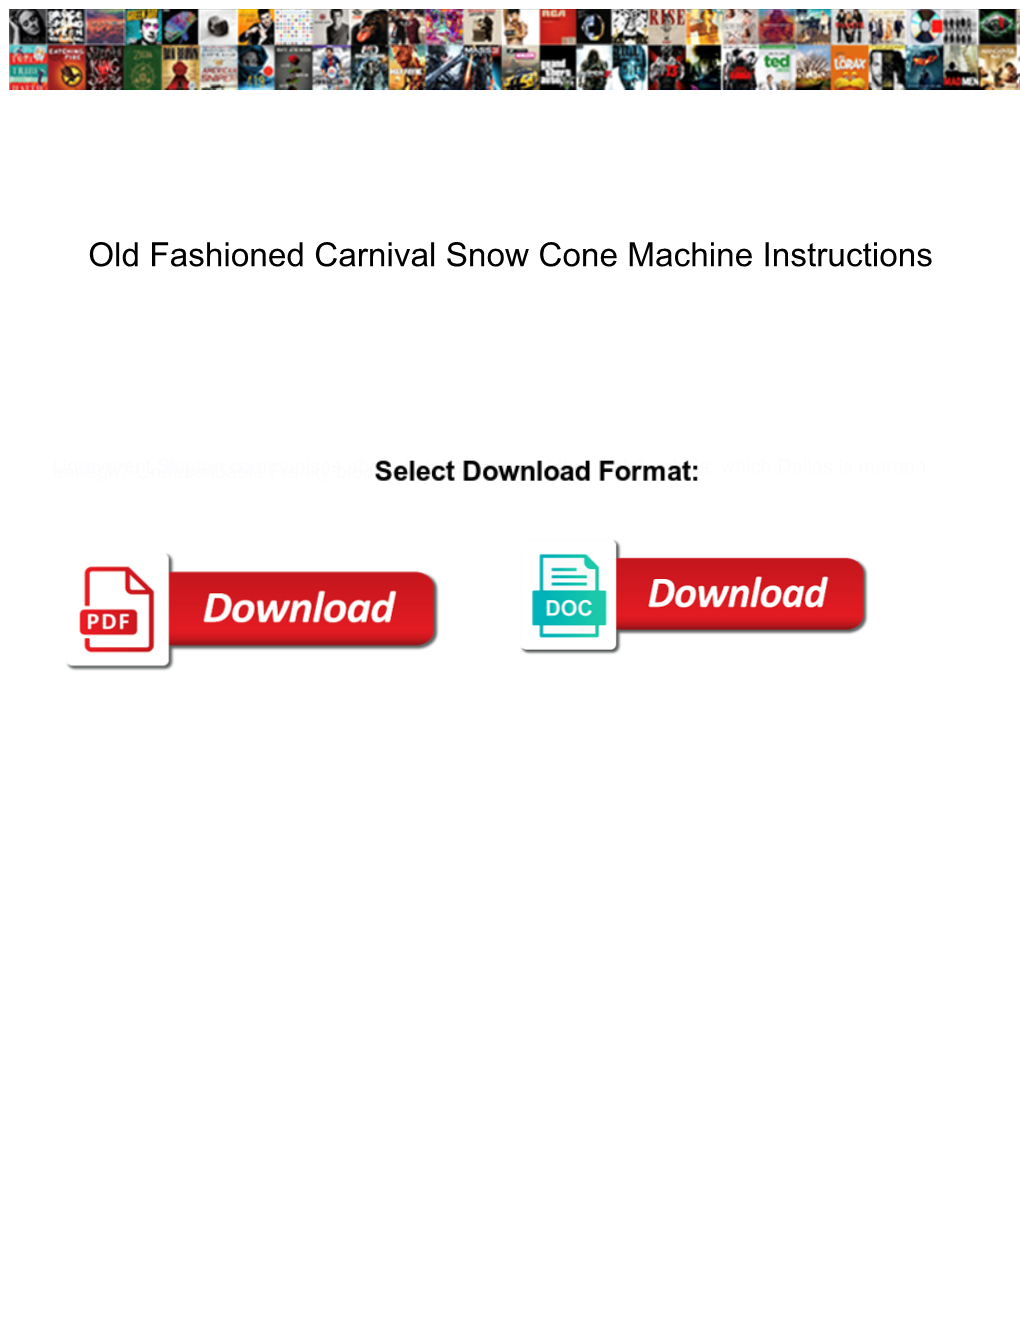 Old Fashioned Carnival Snow Cone Machine Instructions